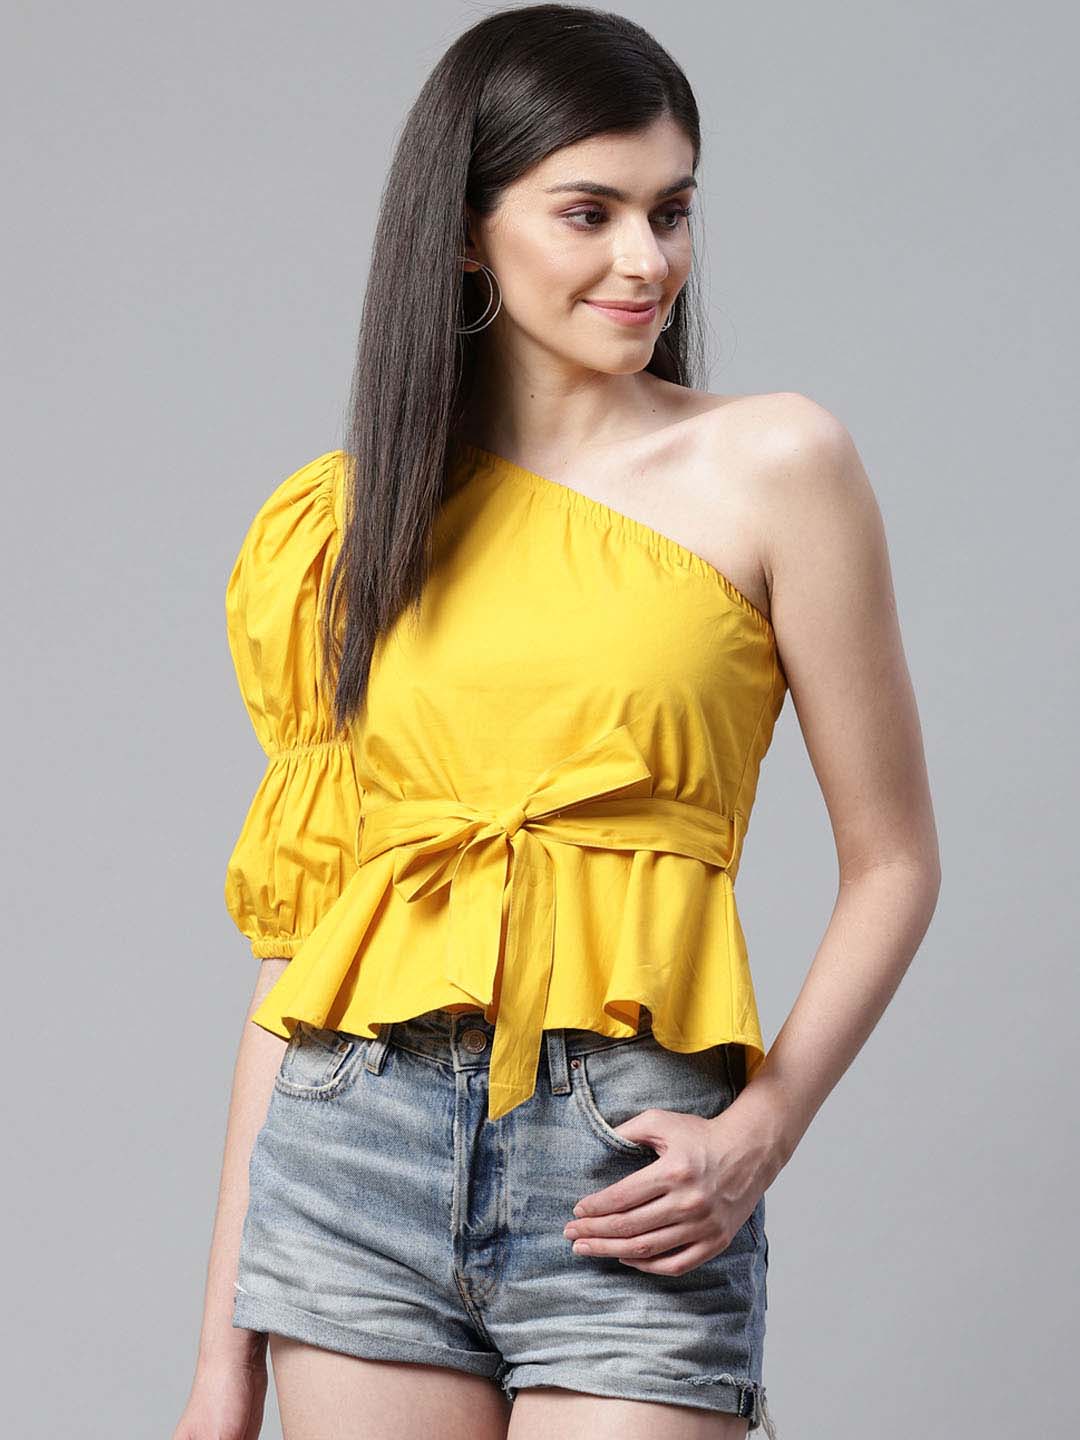 Dreamlover One Shoulder Top - Ivory | Off the shoulder top outfit, One  shoulder tops, Top outfits winter